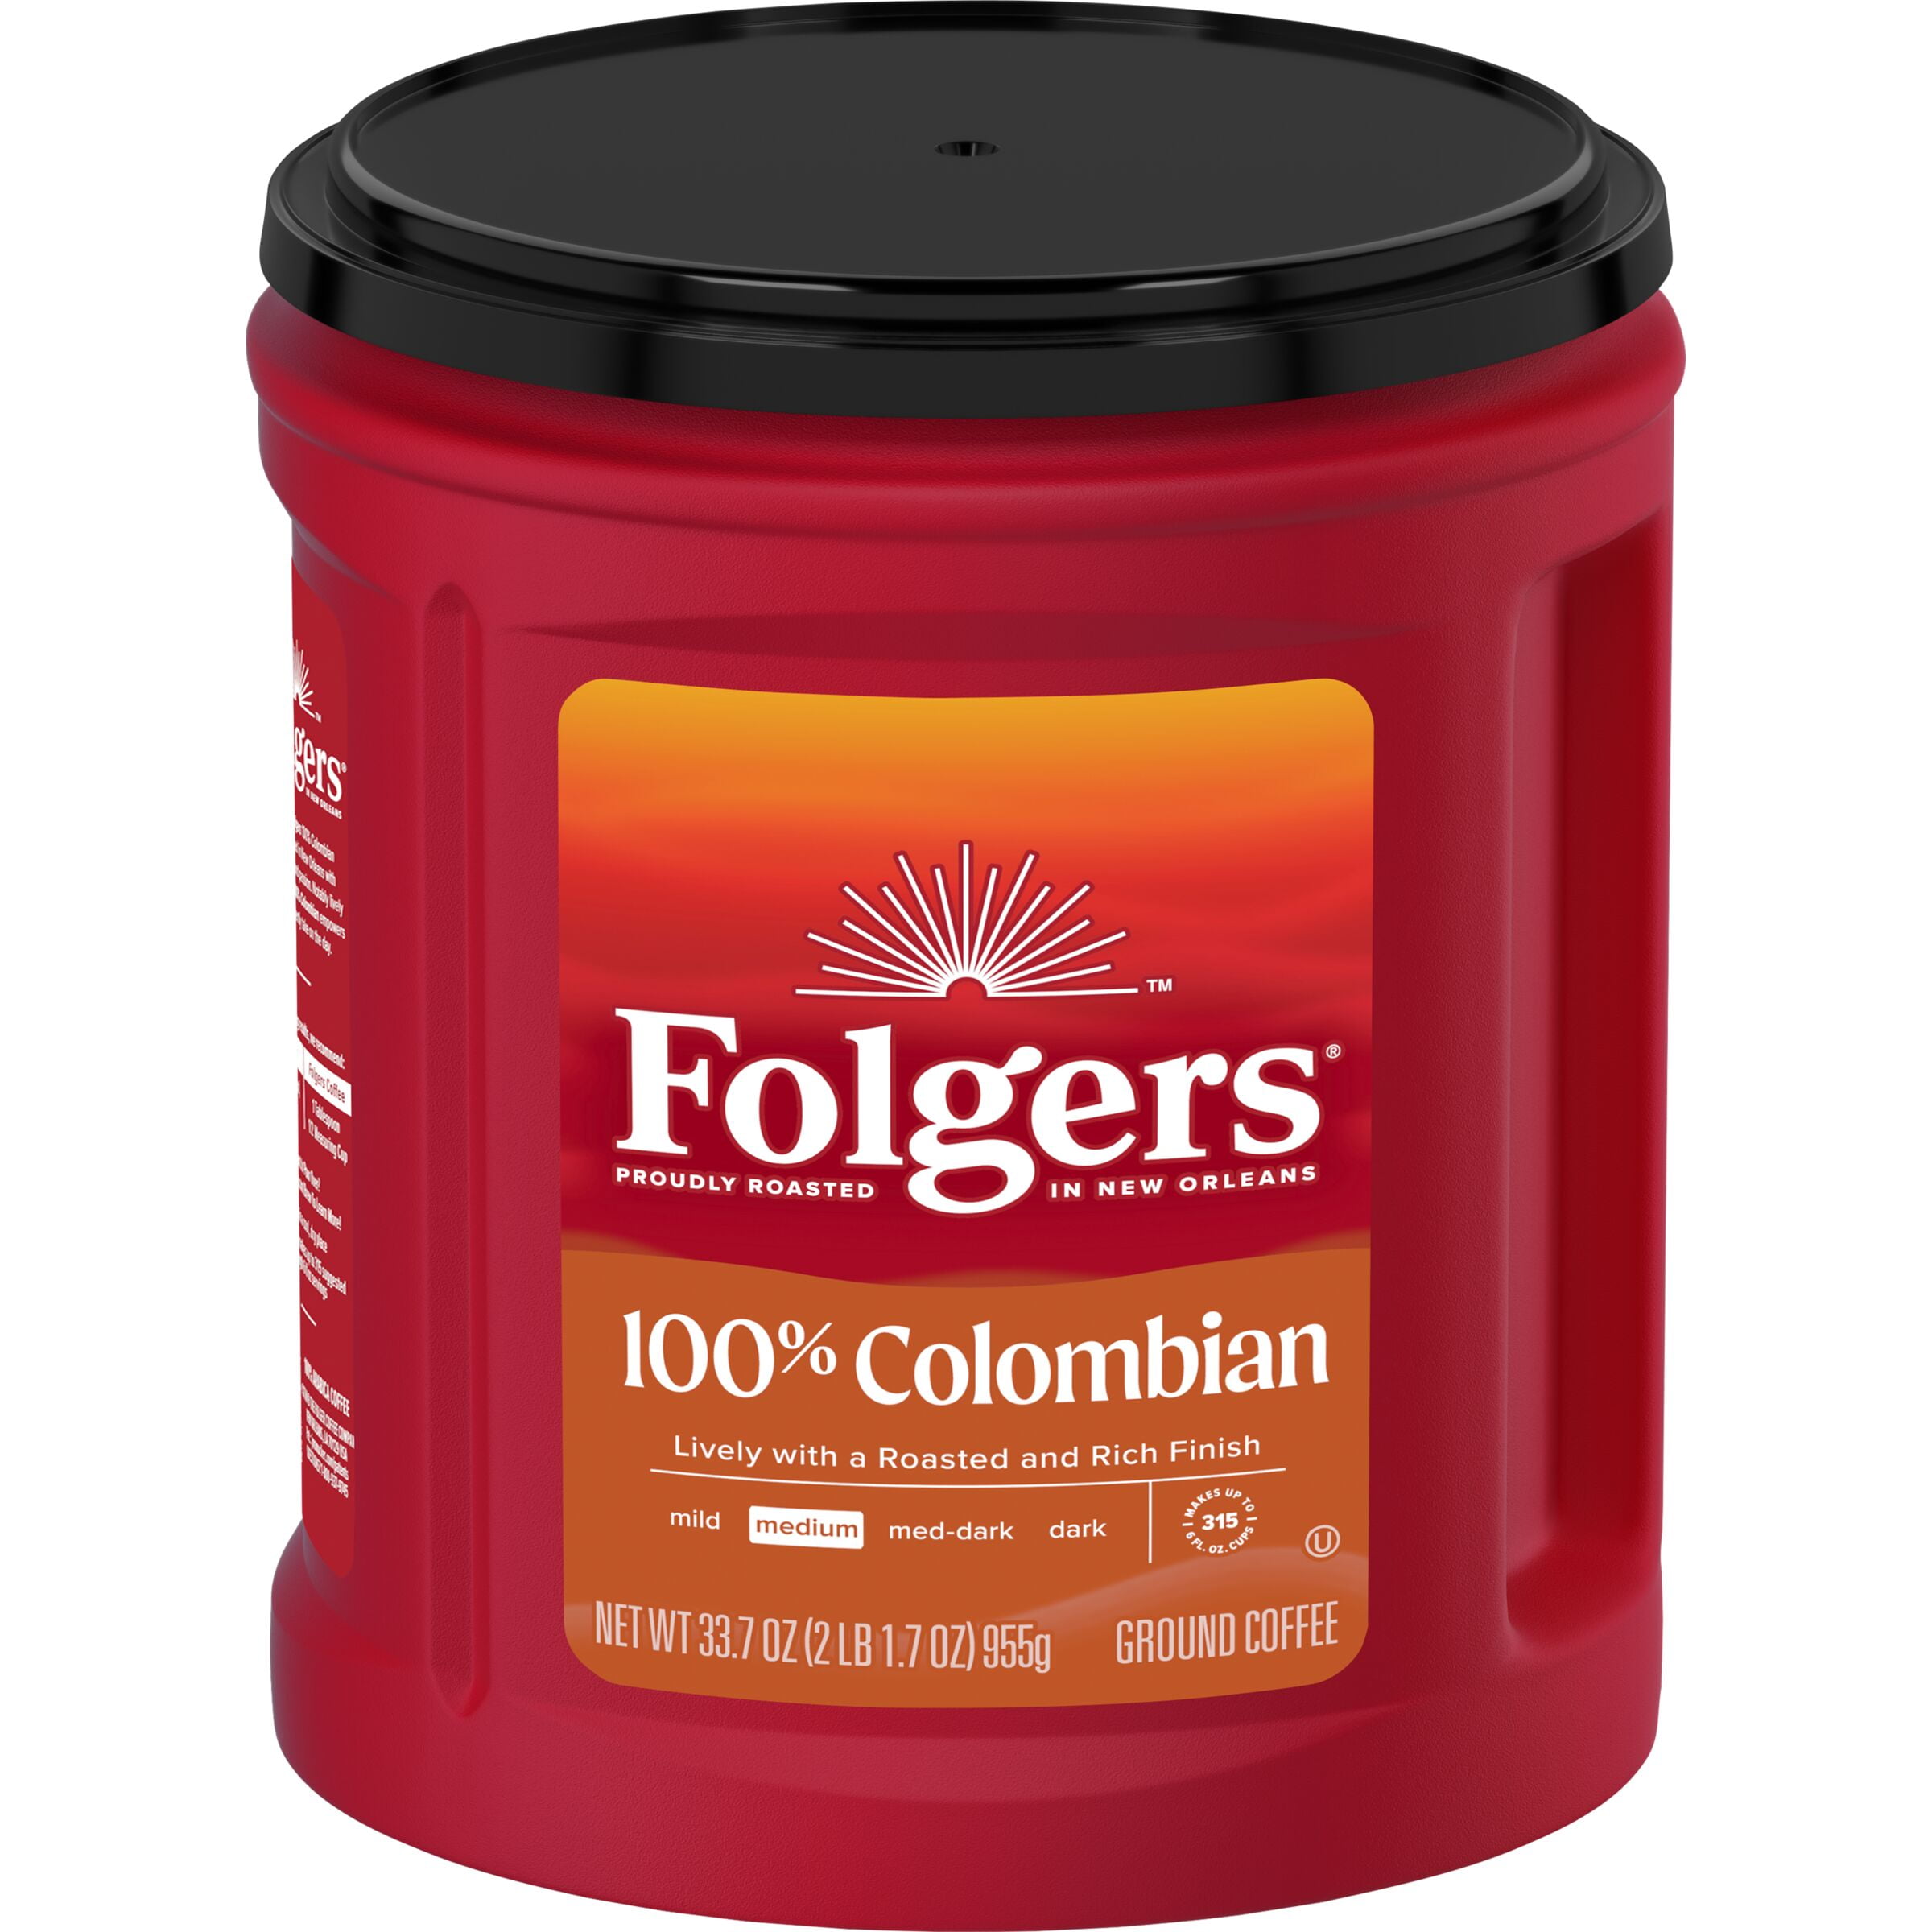 Folgers 100% Colombian Coffee, Medium Roast Ground Coffee, 33.7 Ounce Canister